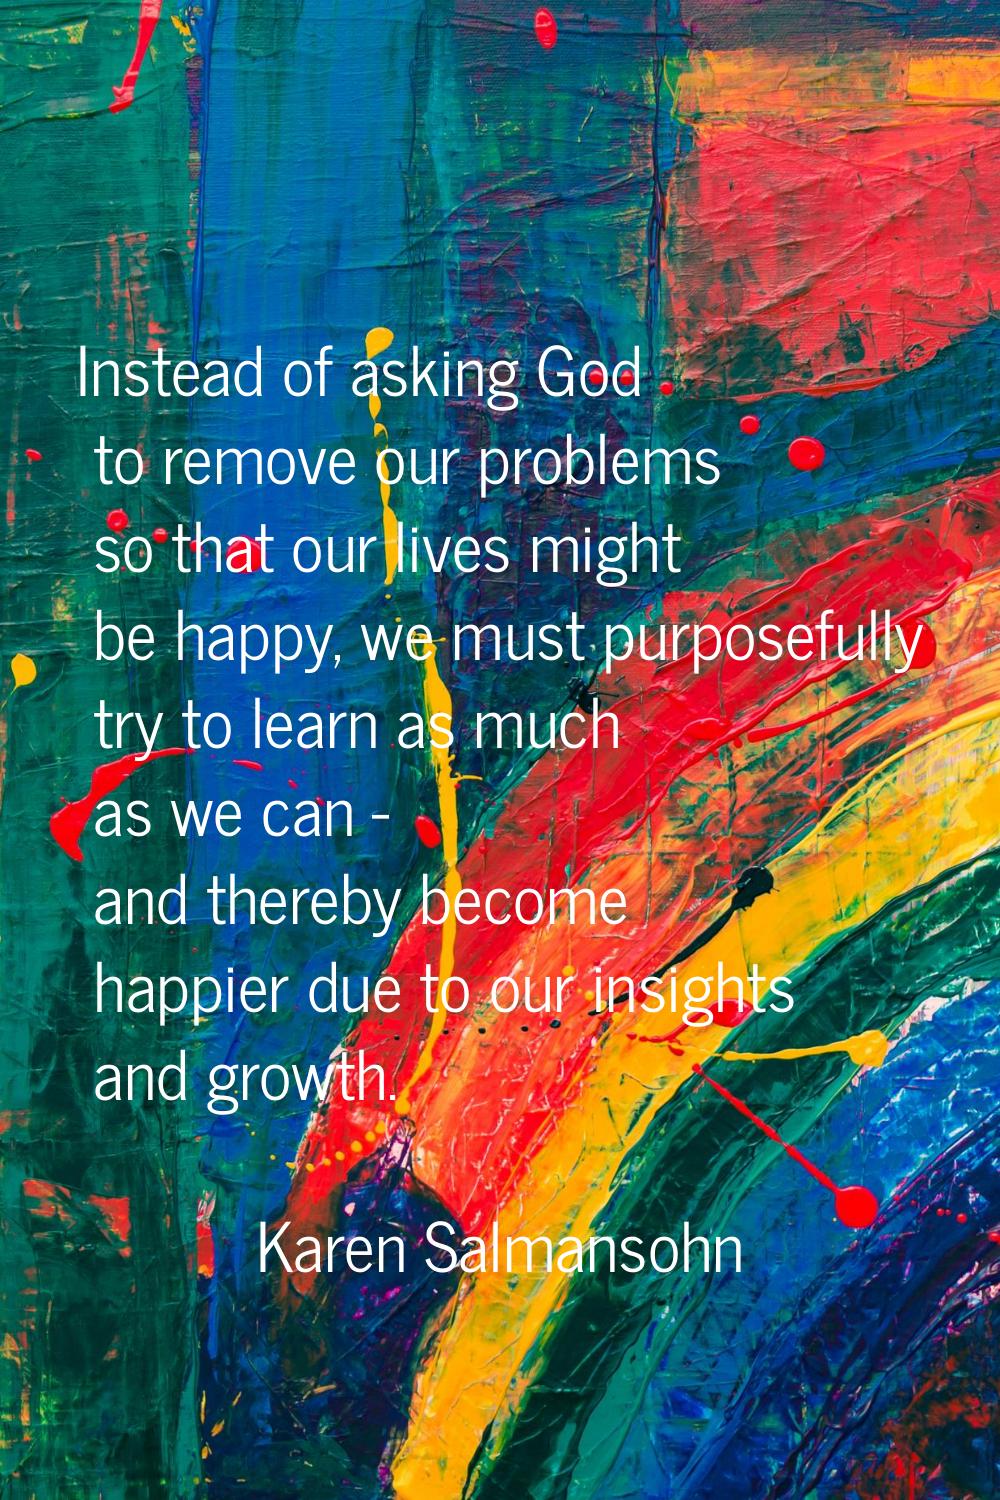 Instead of asking God to remove our problems so that our lives might be happy, we must purposefully